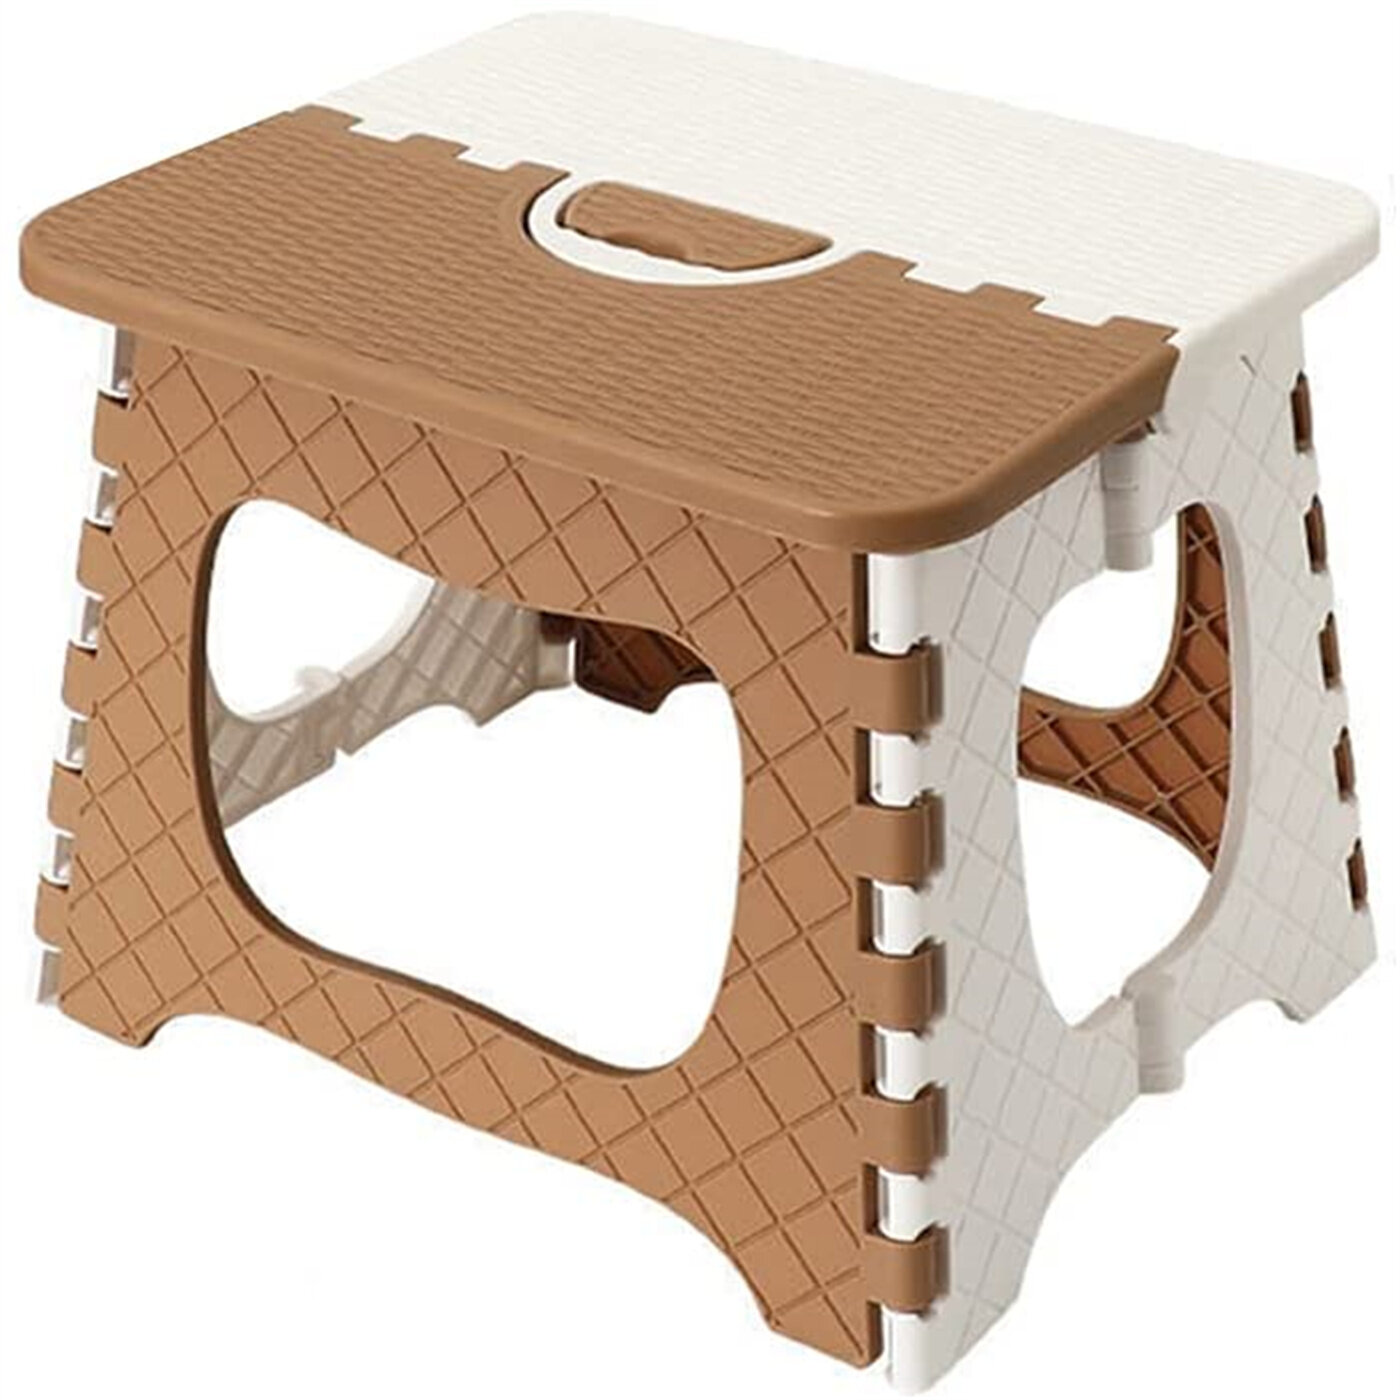 Folding Step Stool The Lightweight Is Sturdy Enough Support Adult Safe for Kid